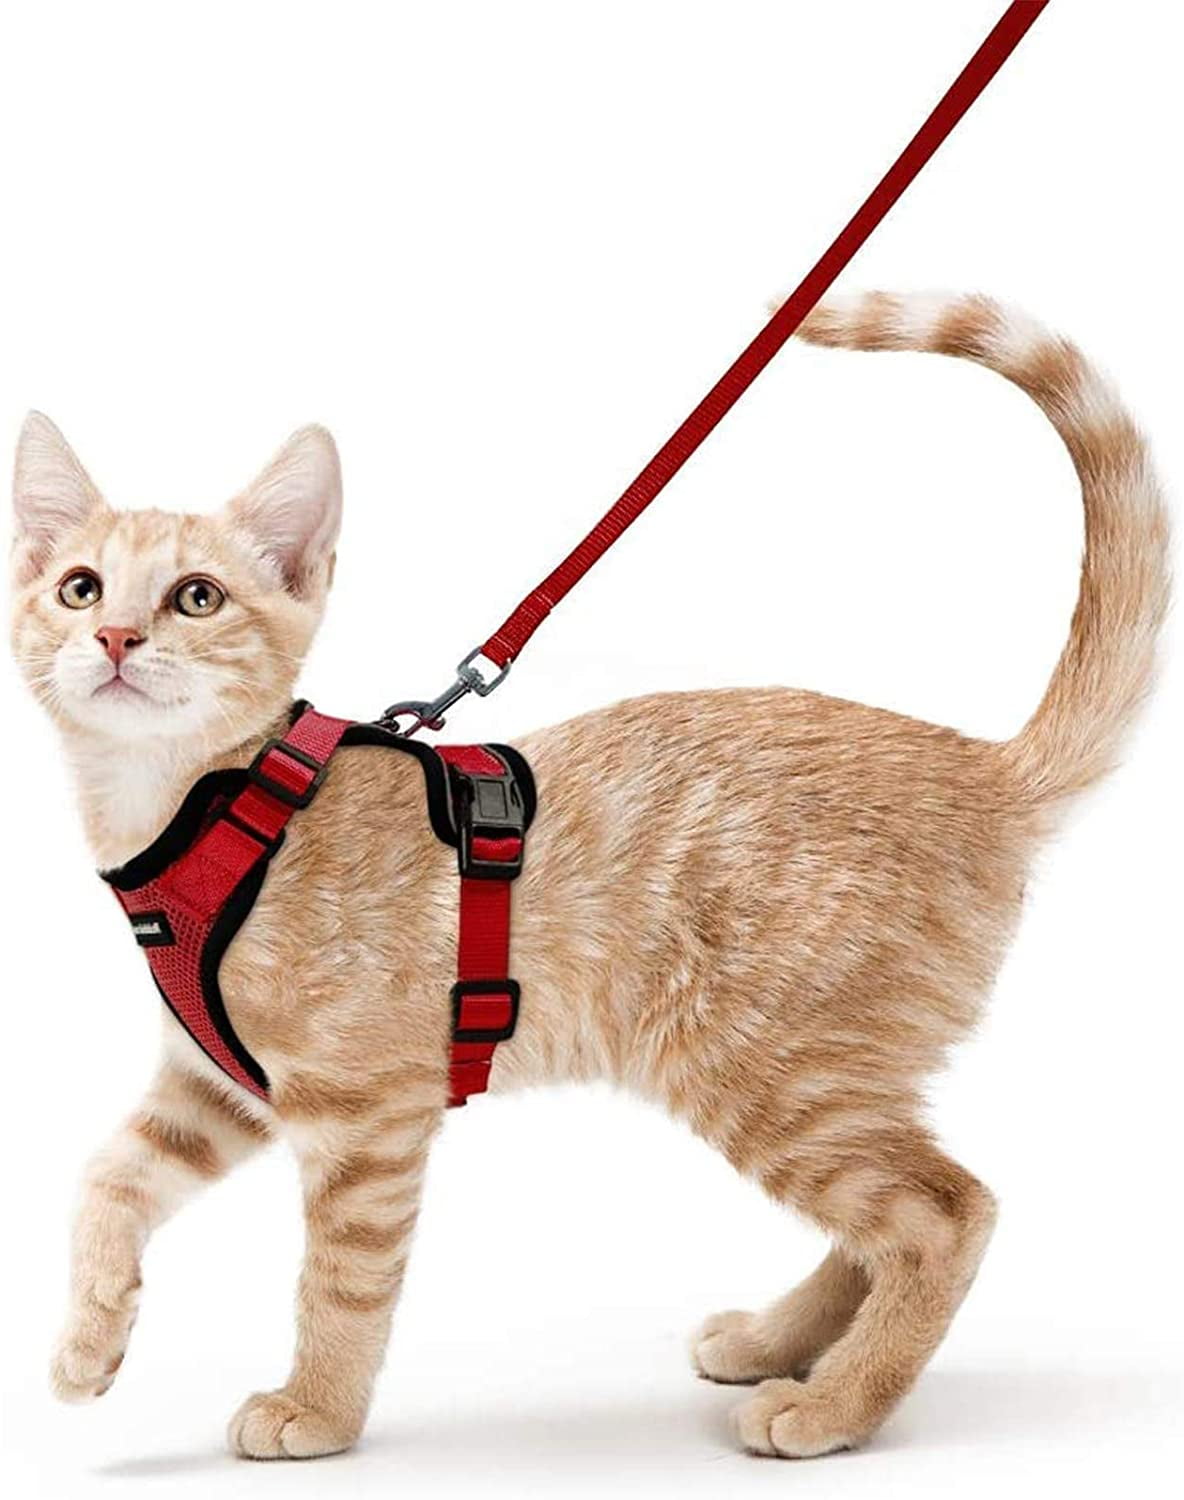 Cat Walking Harness & Leash Reflective Puppy Nylon Harness & Personalized Tag 